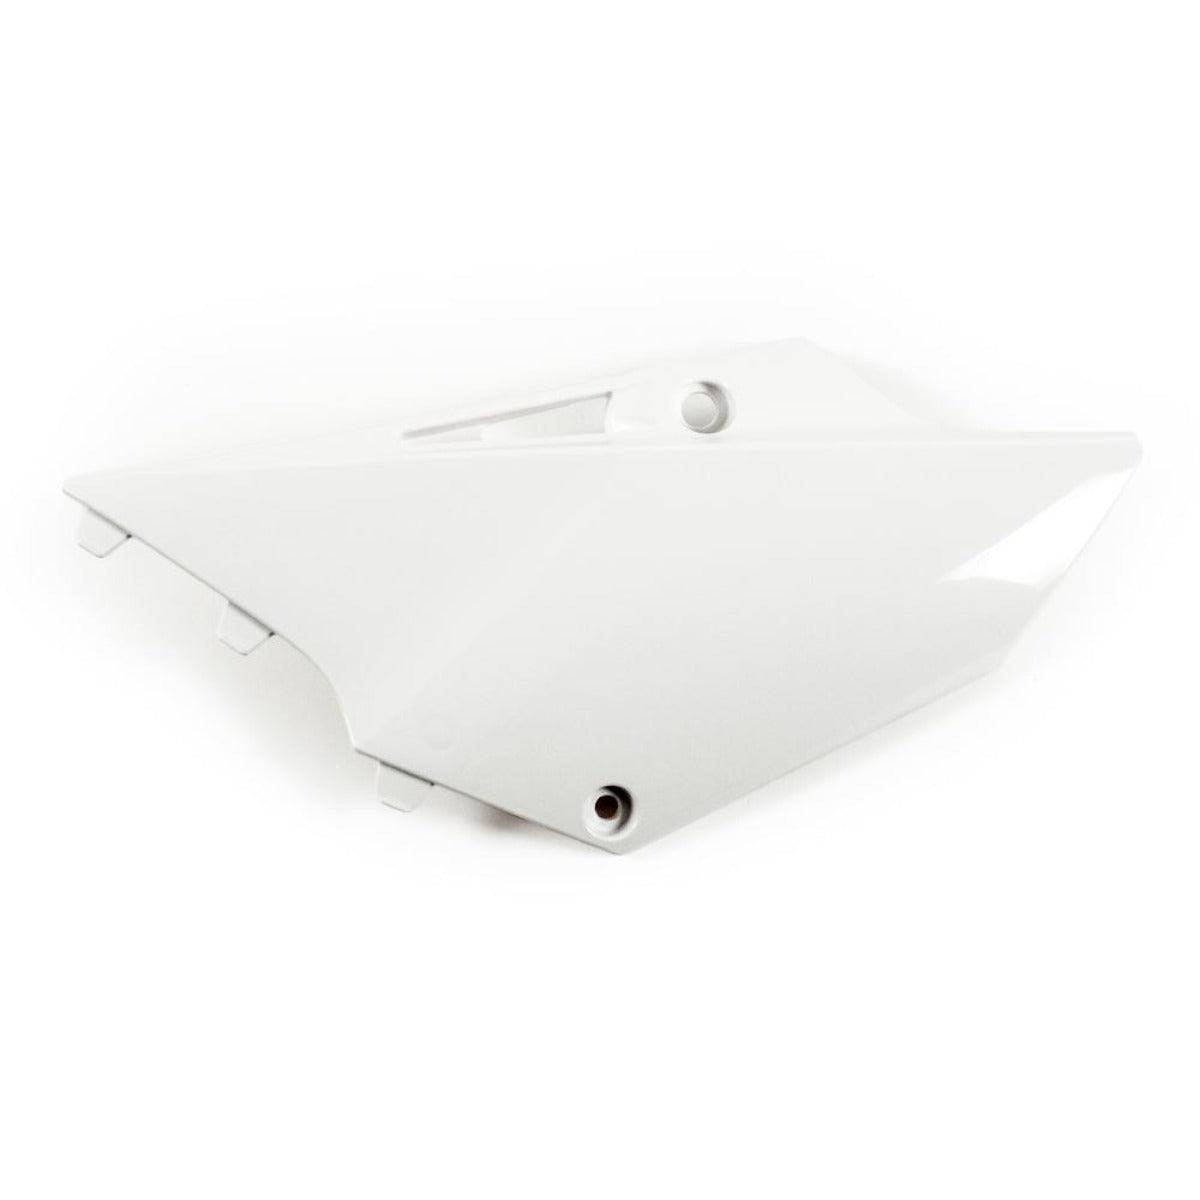 Factory Effex Plastic Side Plate-YZ125/250 15-21 (White) 2402990002 - American Legend Rider